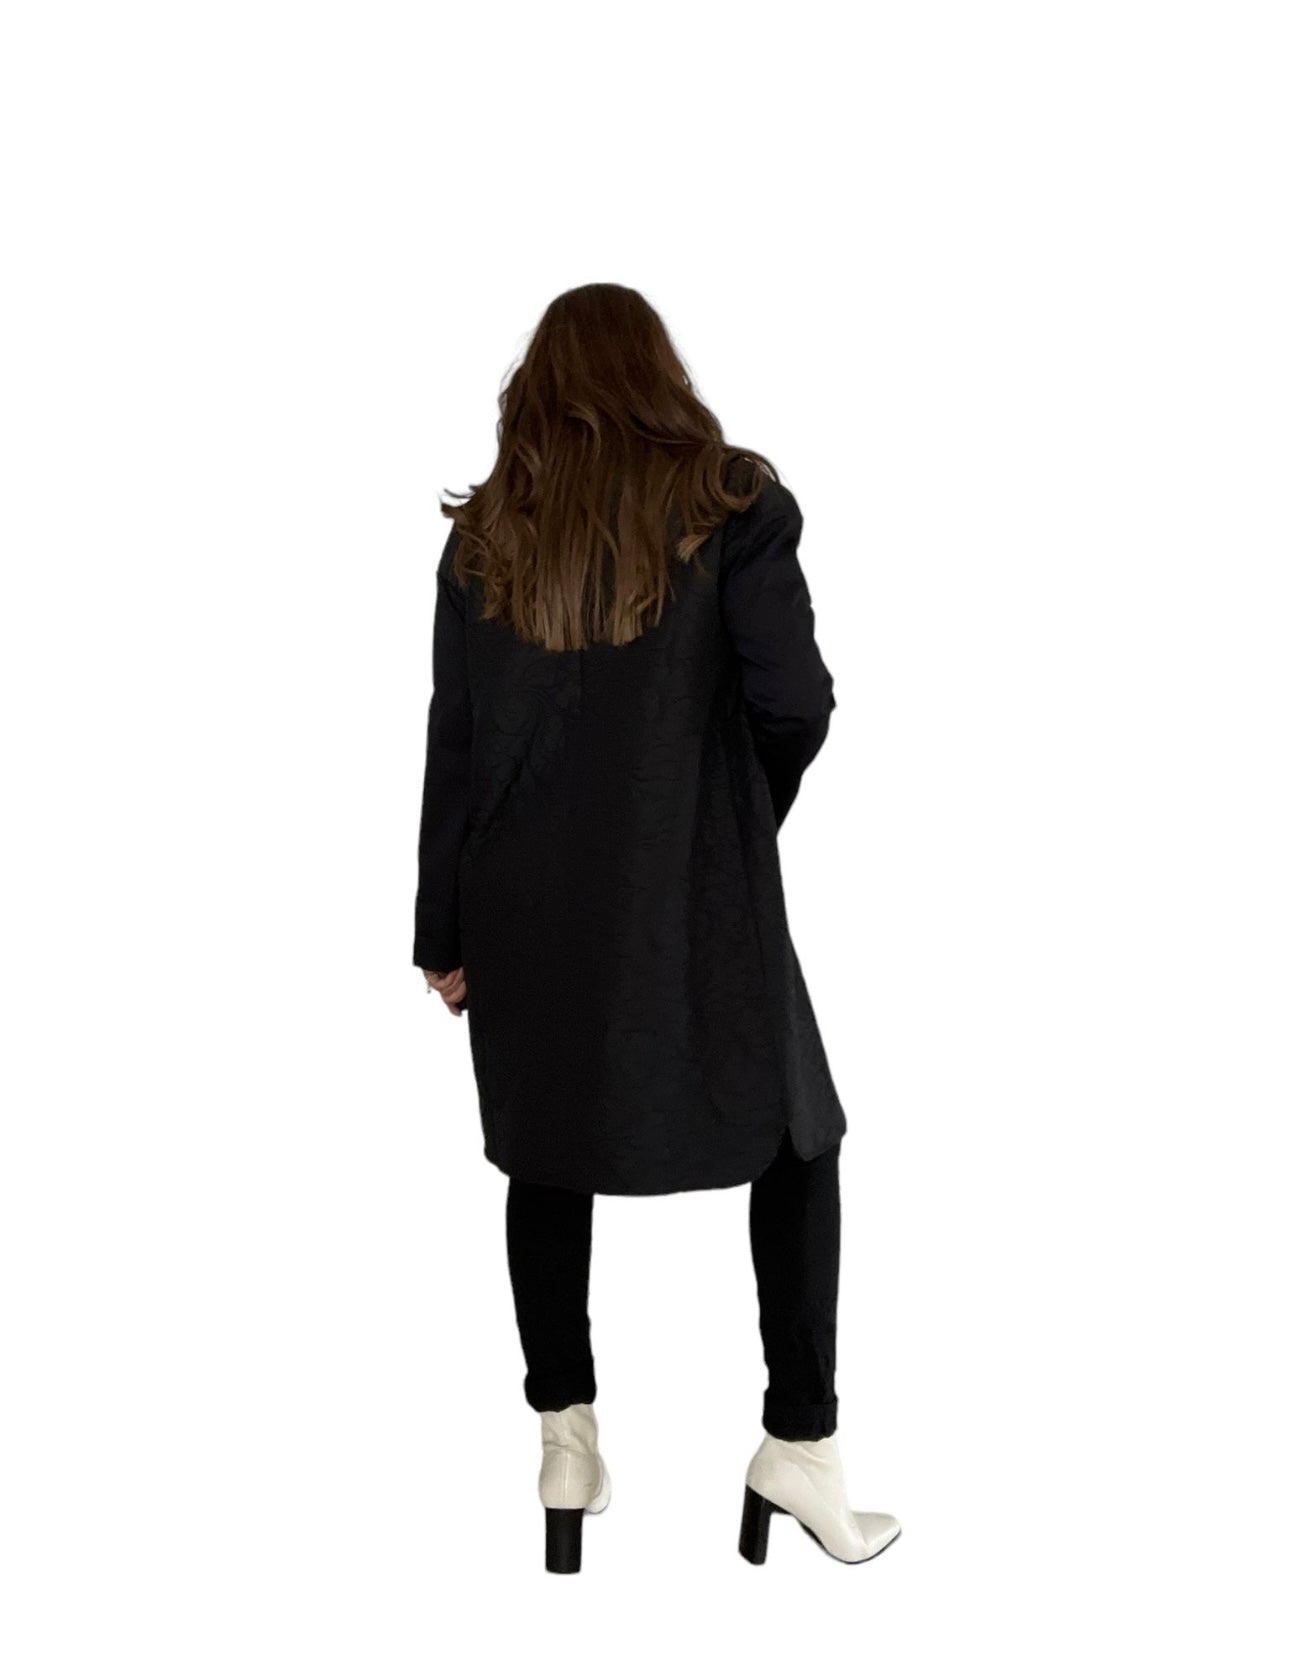 Amici Clothing Lombardy Lined Coat Black